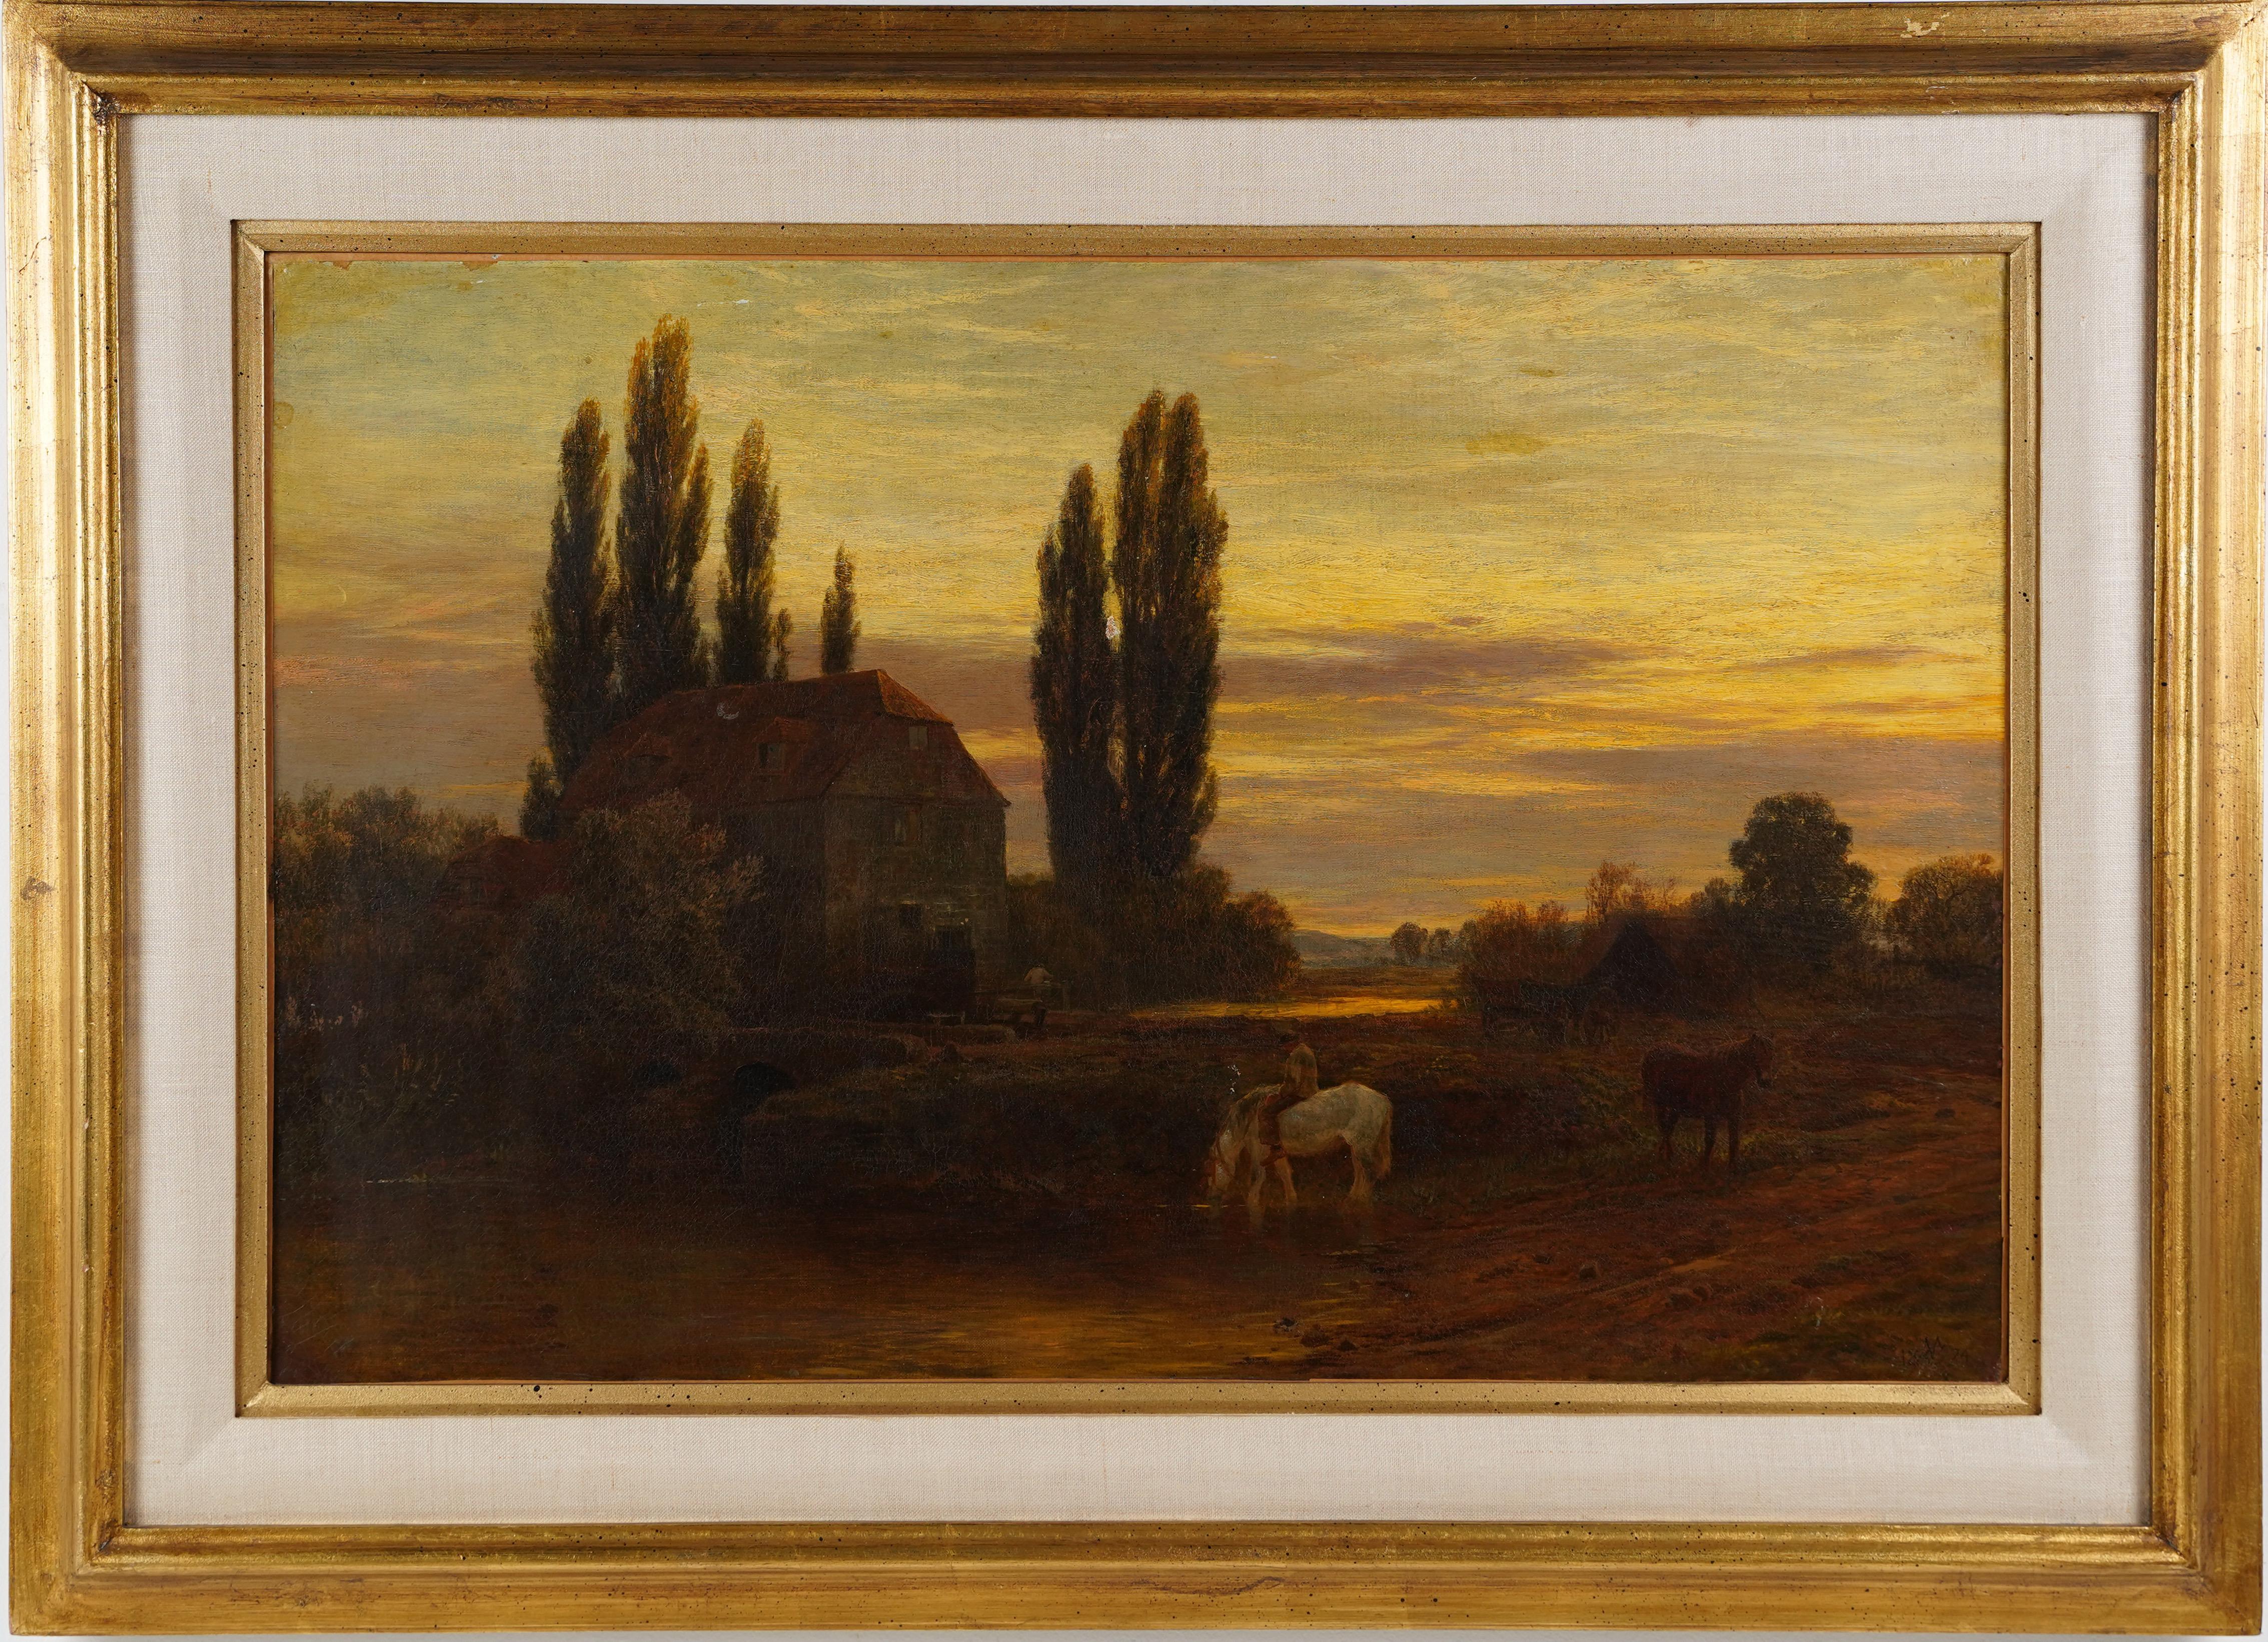 Unknown Landscape Painting - Antique American School Impressionist Sunset Hudson River School Oil Painting